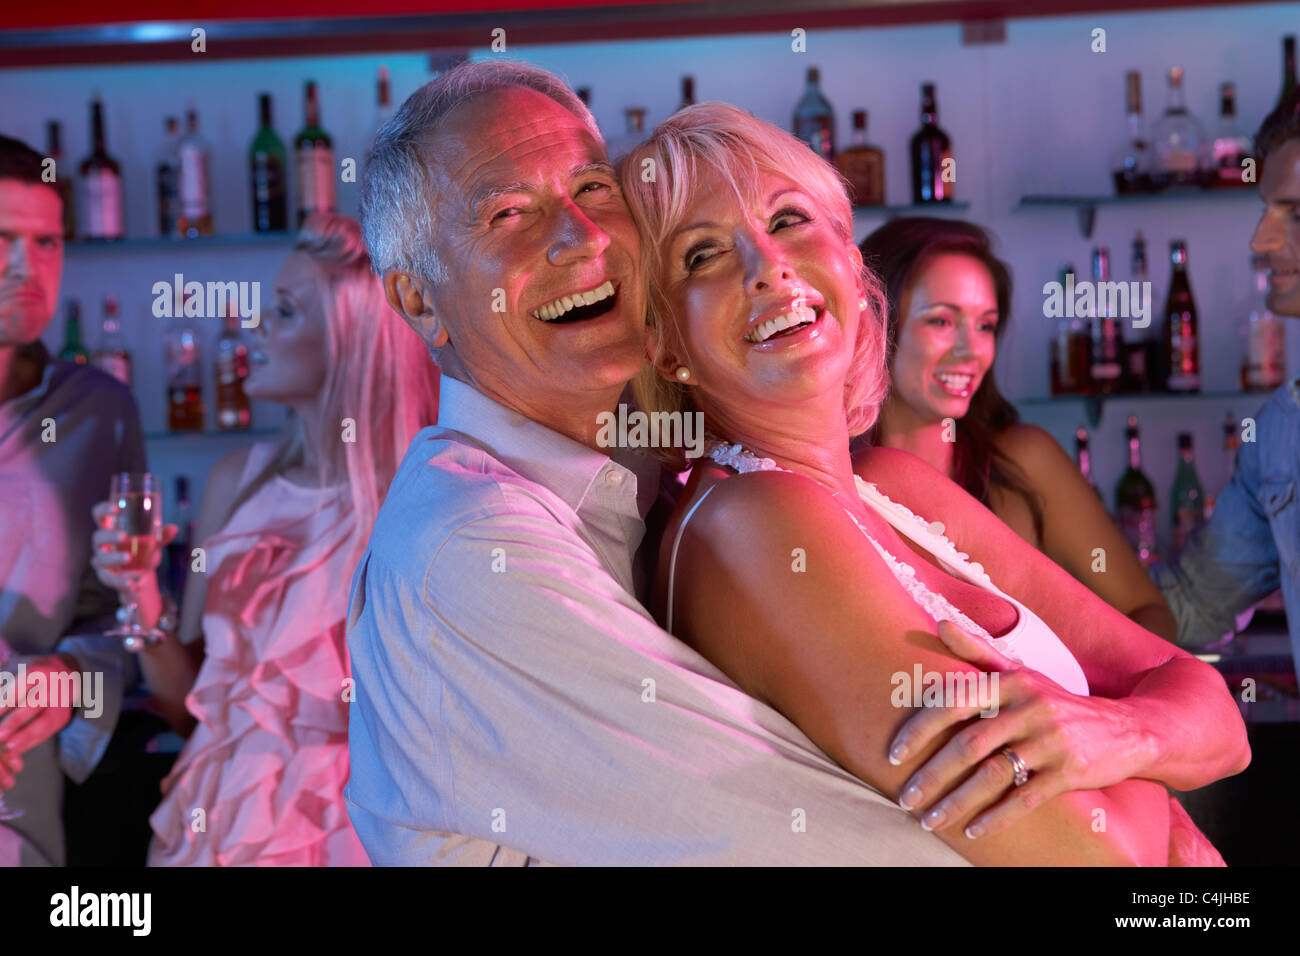 Senior Couple Having Fun In Busy Bar Banque D'Images